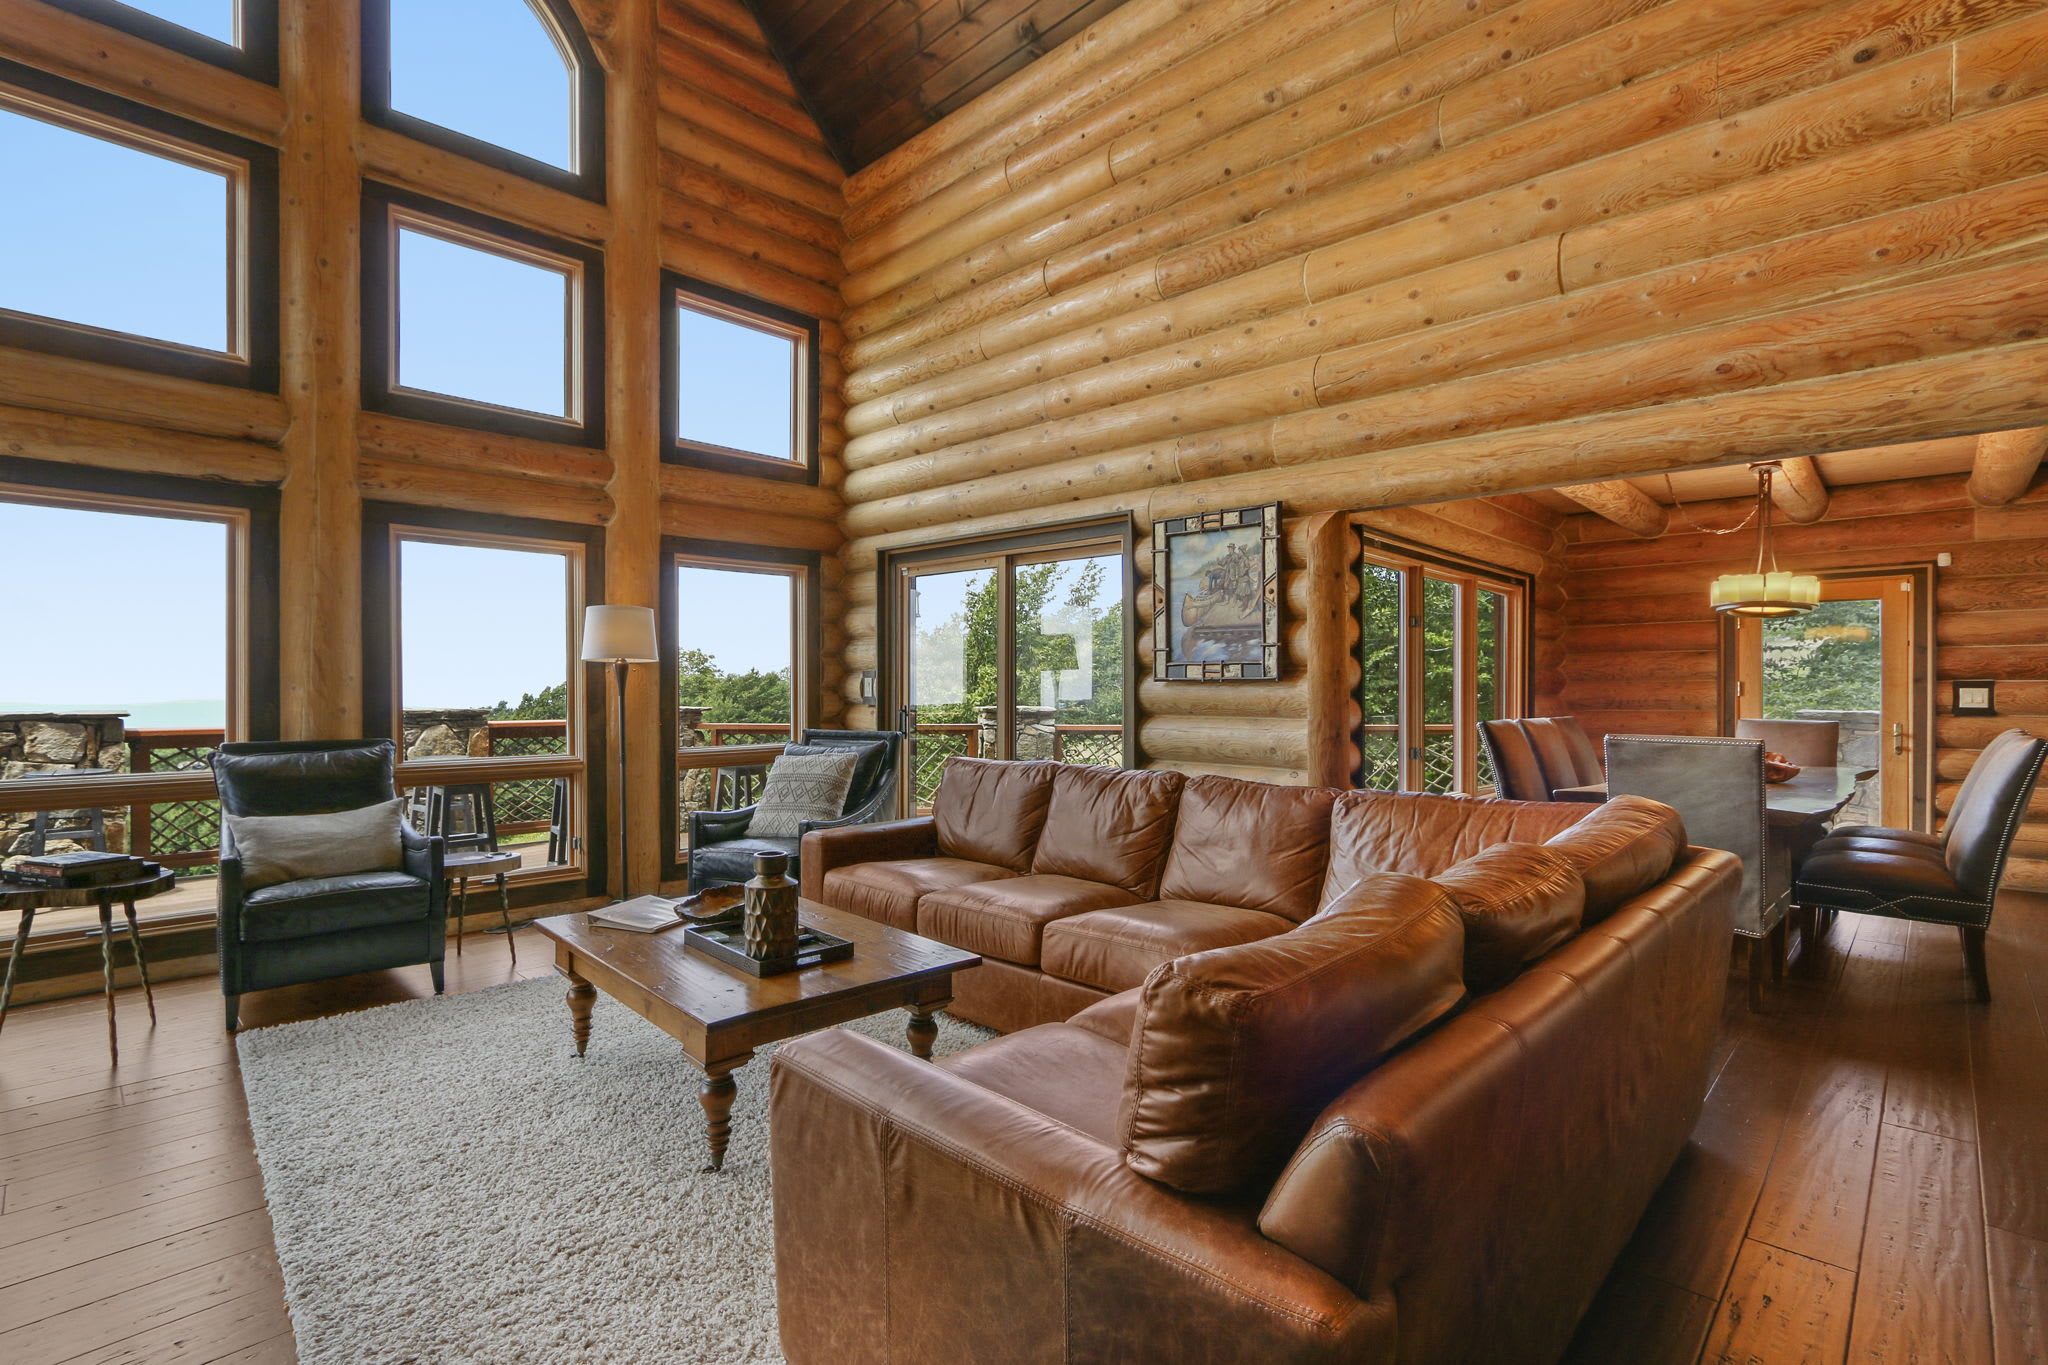 Indulge in living room comfort with a plush couch and chairs surrounding the gas fireplace. Perfect for unwinding after a day of adventure, set against a scenic backdrop of nature's beauty.